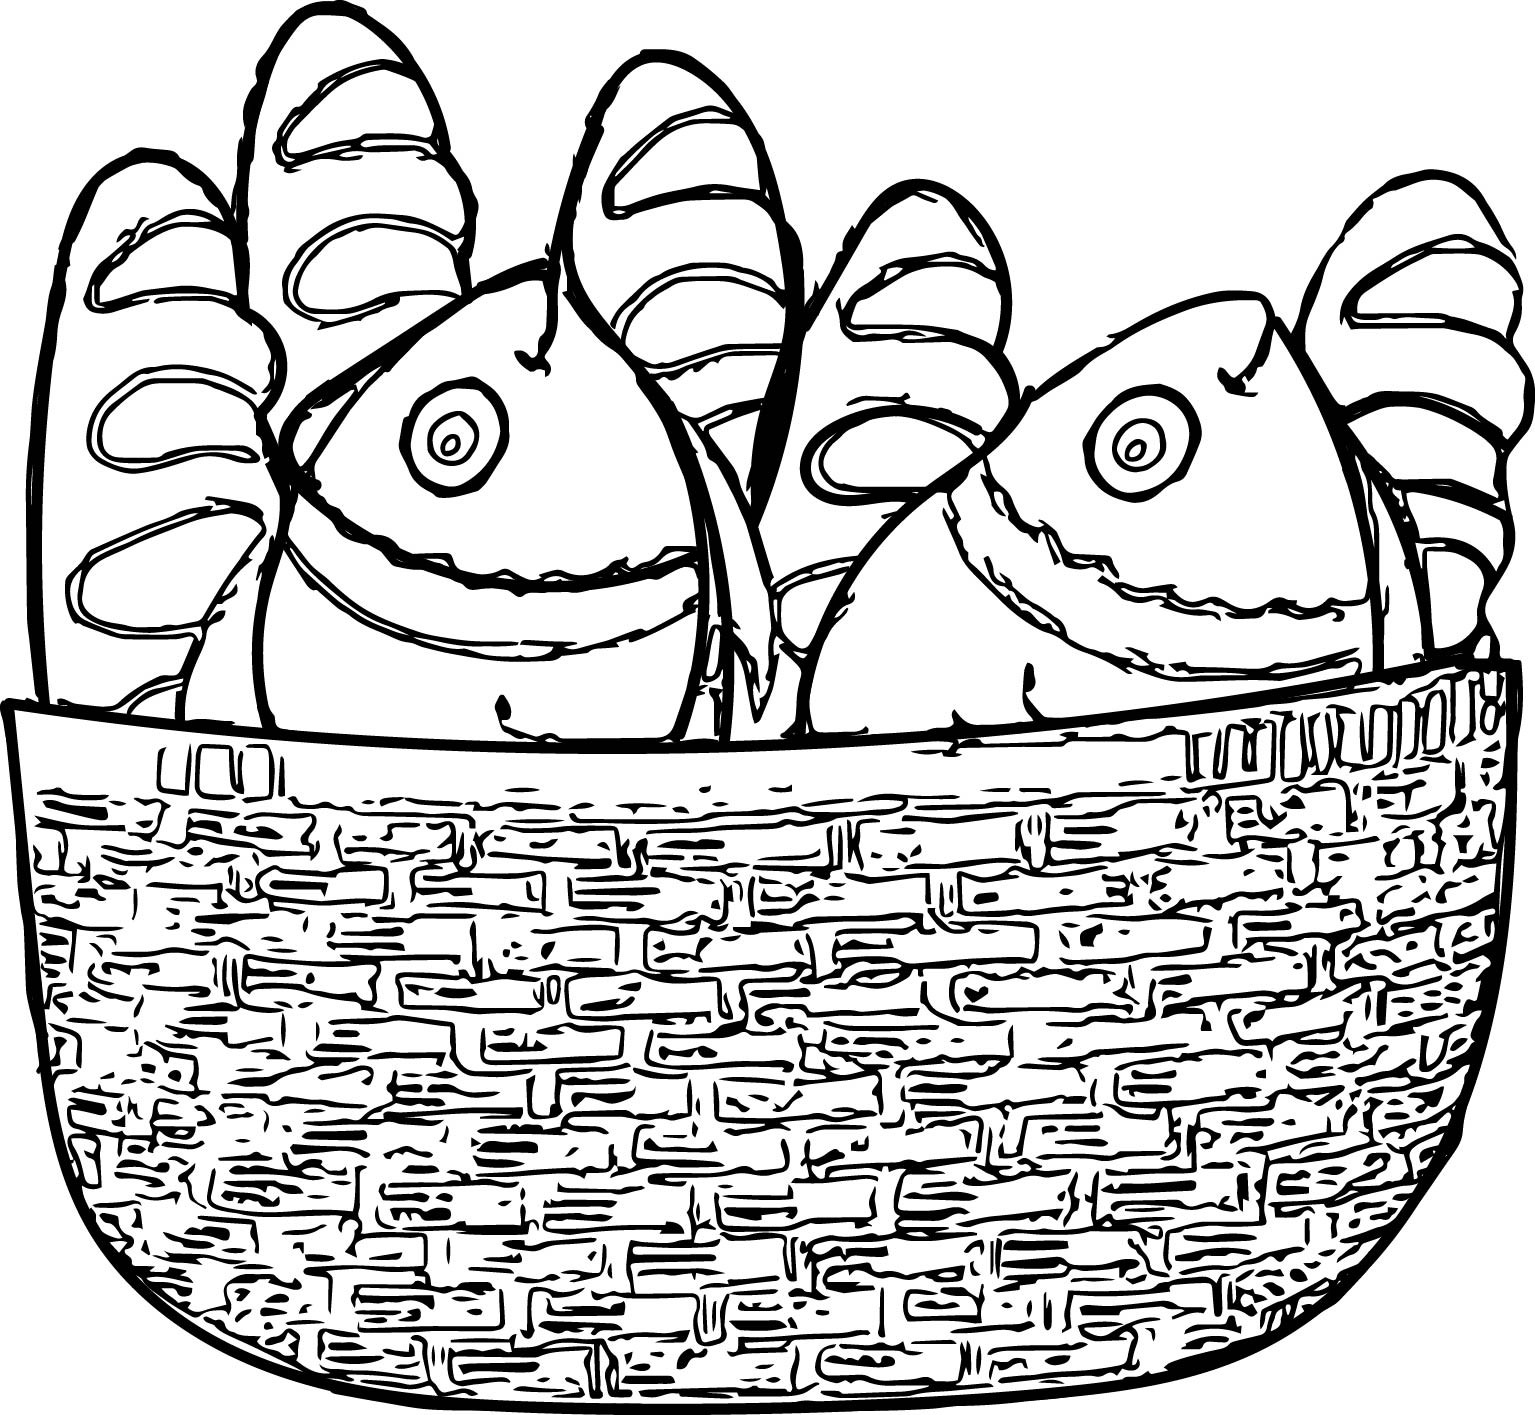 Loaves And Fishes Coloring Page at Free printable